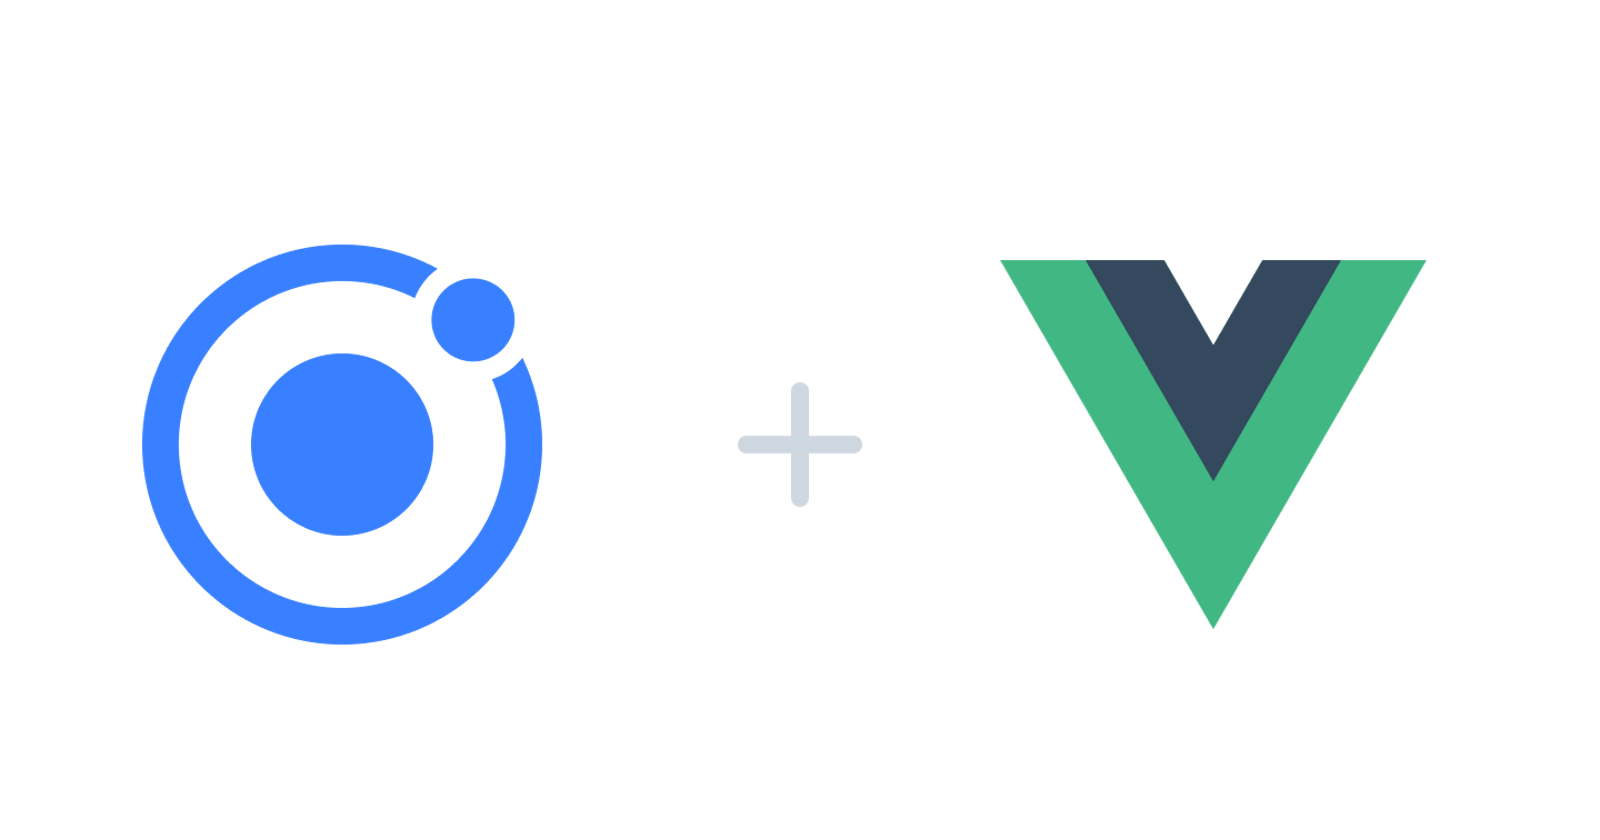 How to create a simple ionic vue app